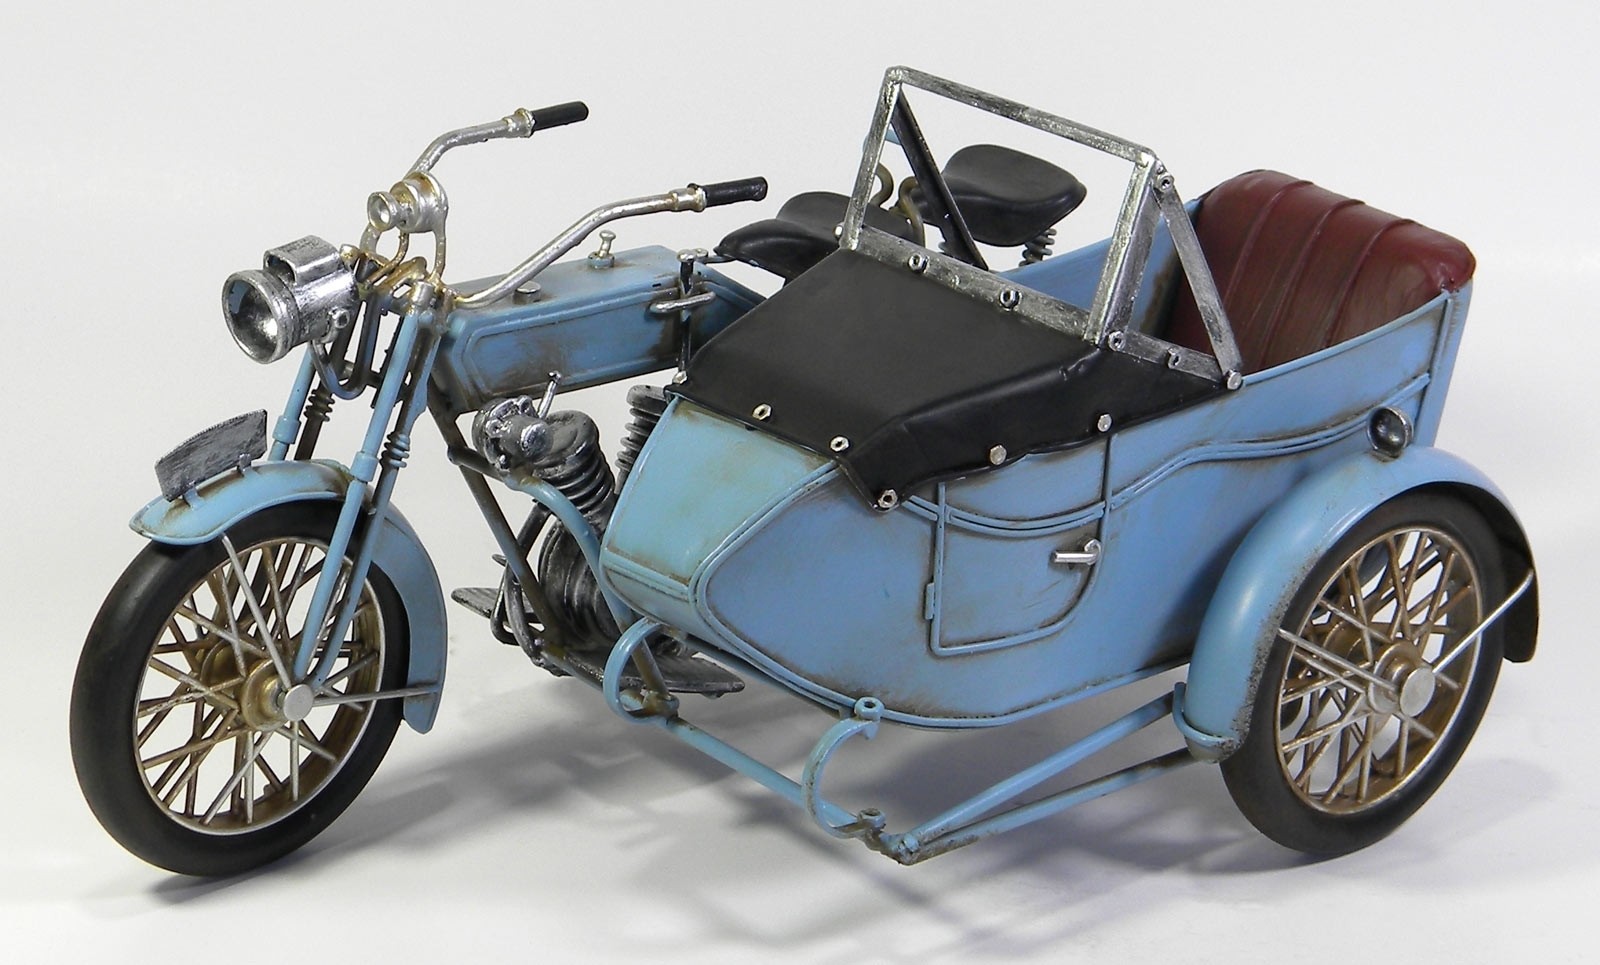 Motorcycle With Sidecar